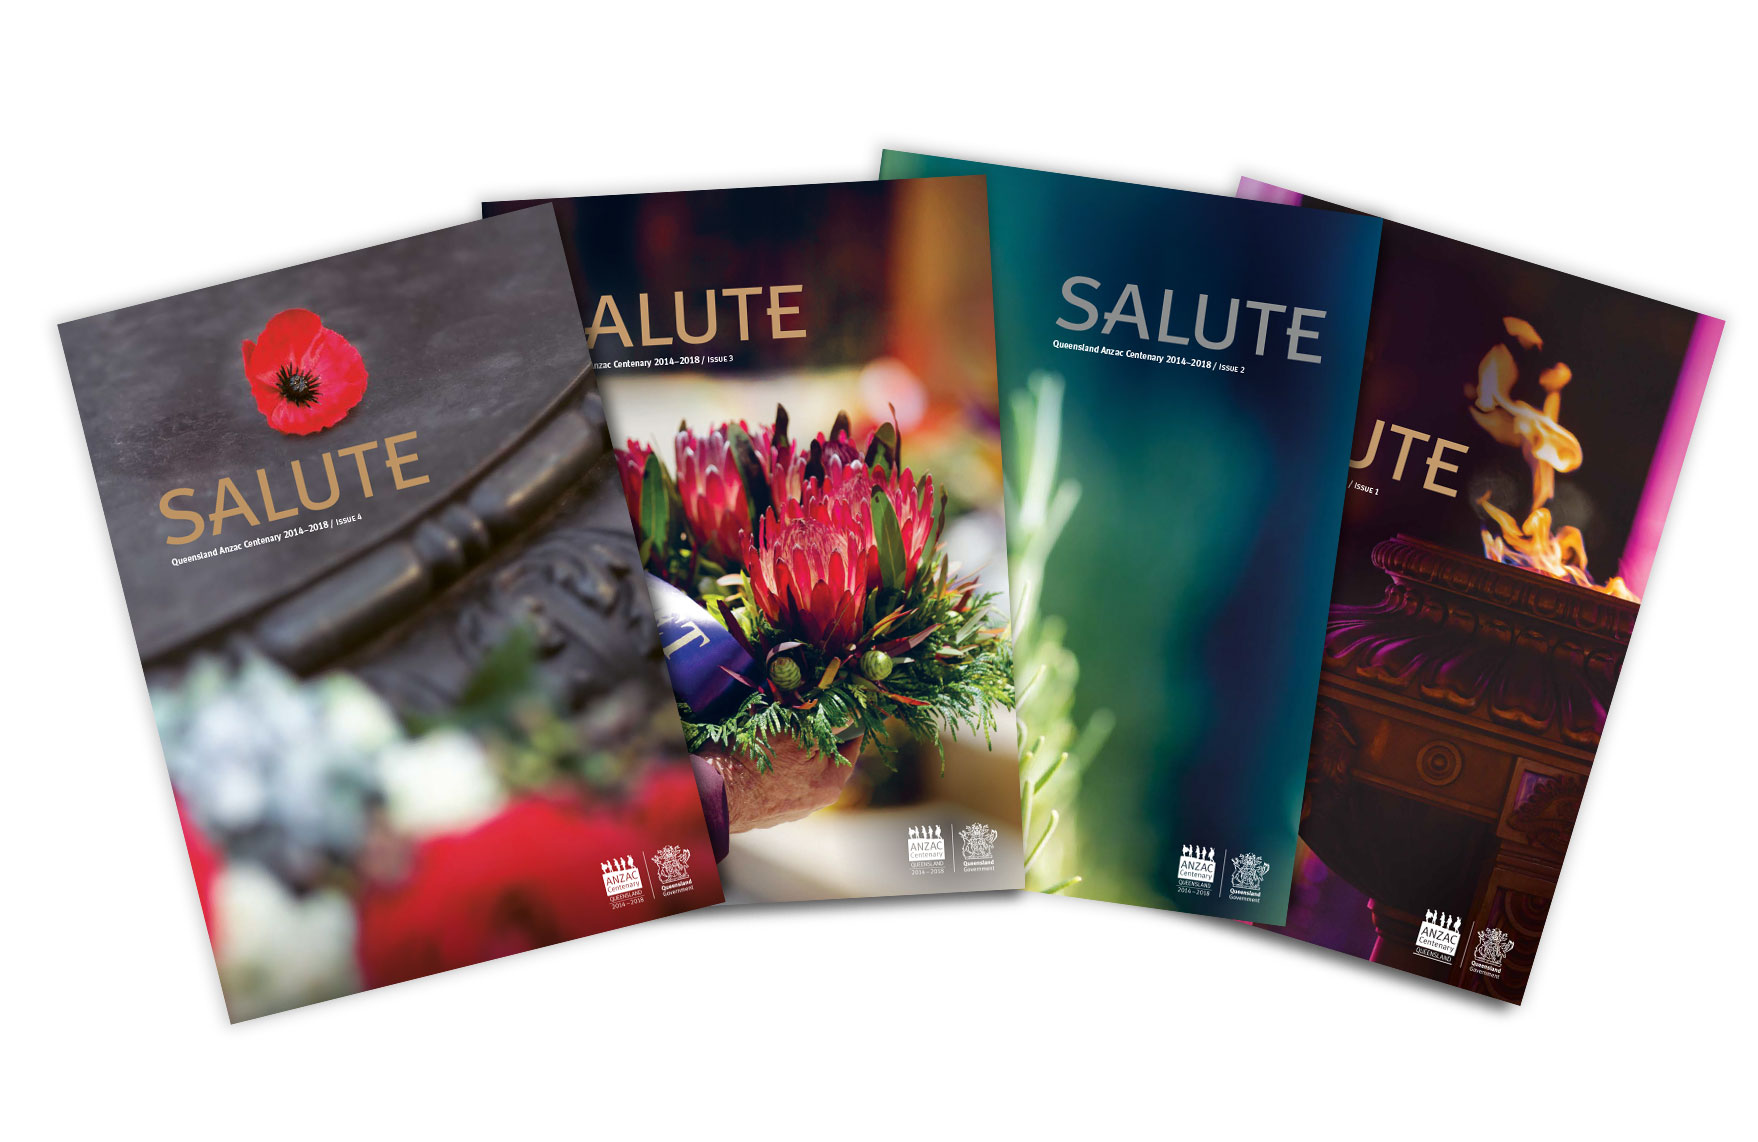 Salute - issues 1, 2, 3, and 4.